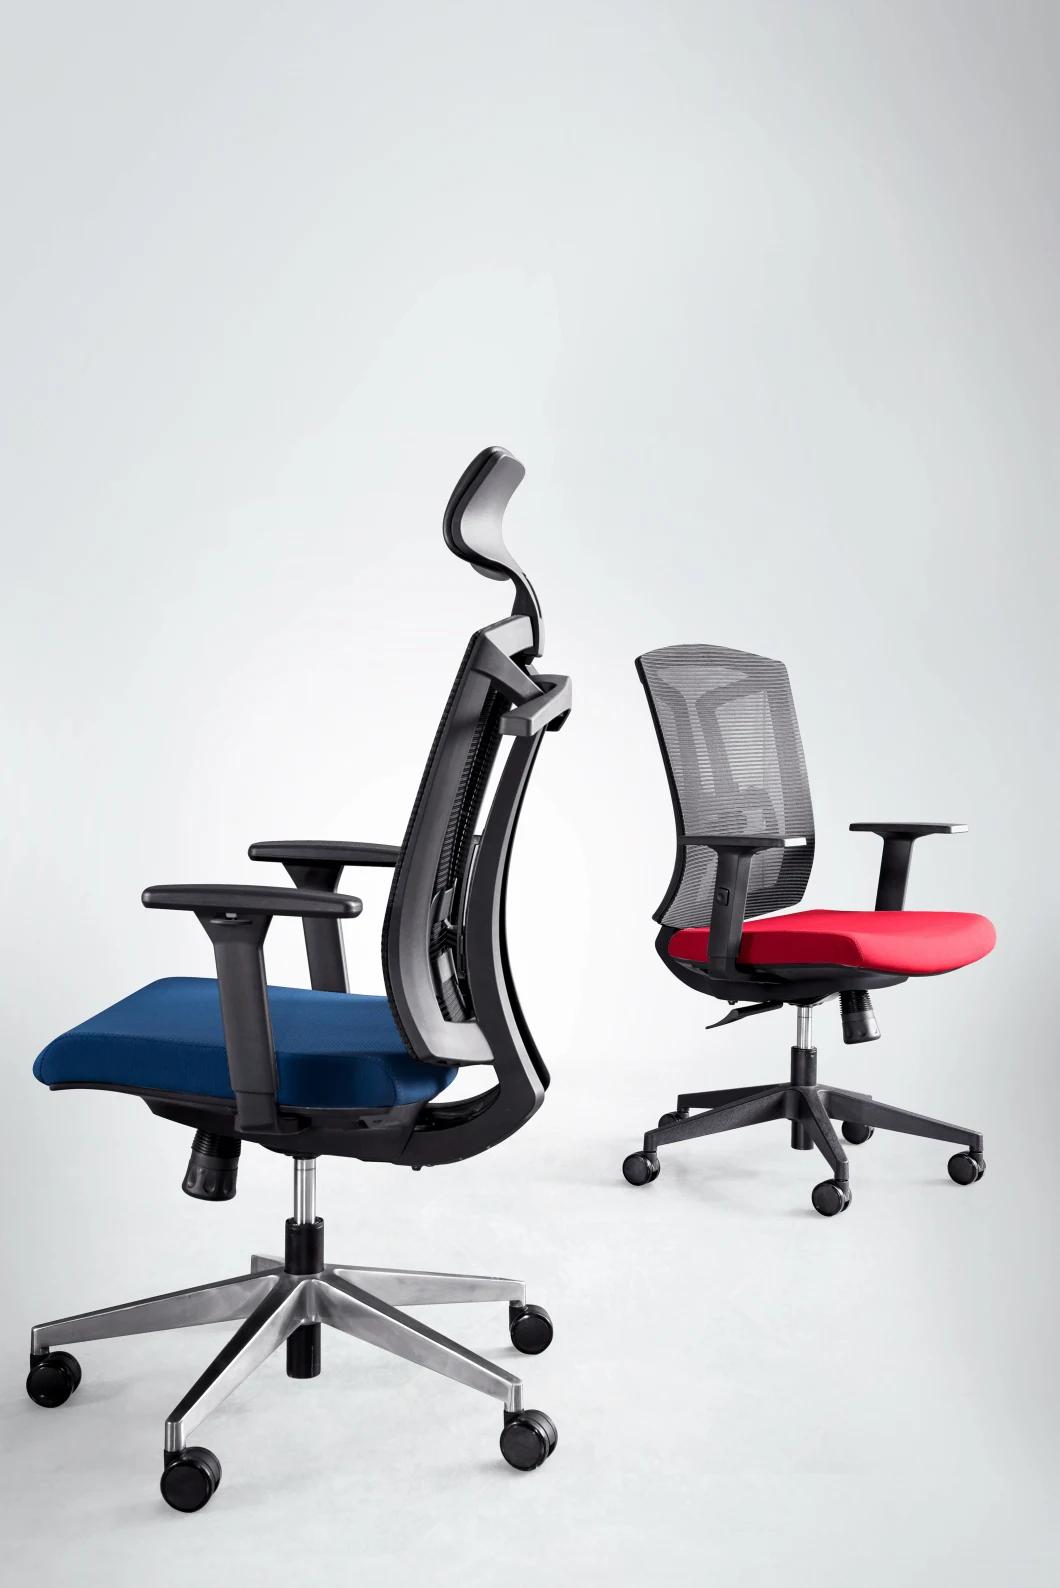 Manufacture PA+Fiber Glass New Office Furniture Boss Chair Swivel Task Laptop Game